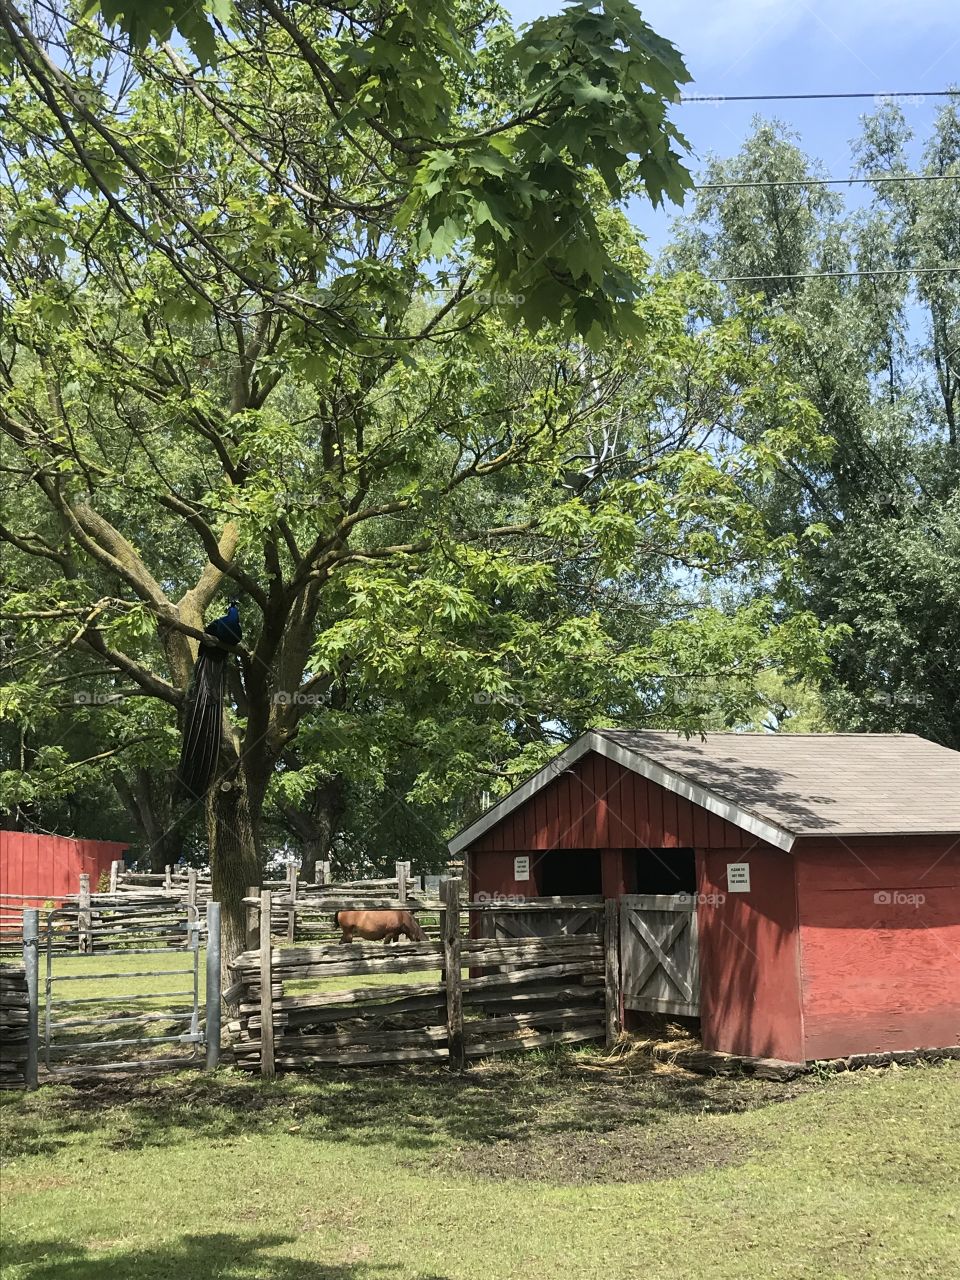 Red farm shed and horse